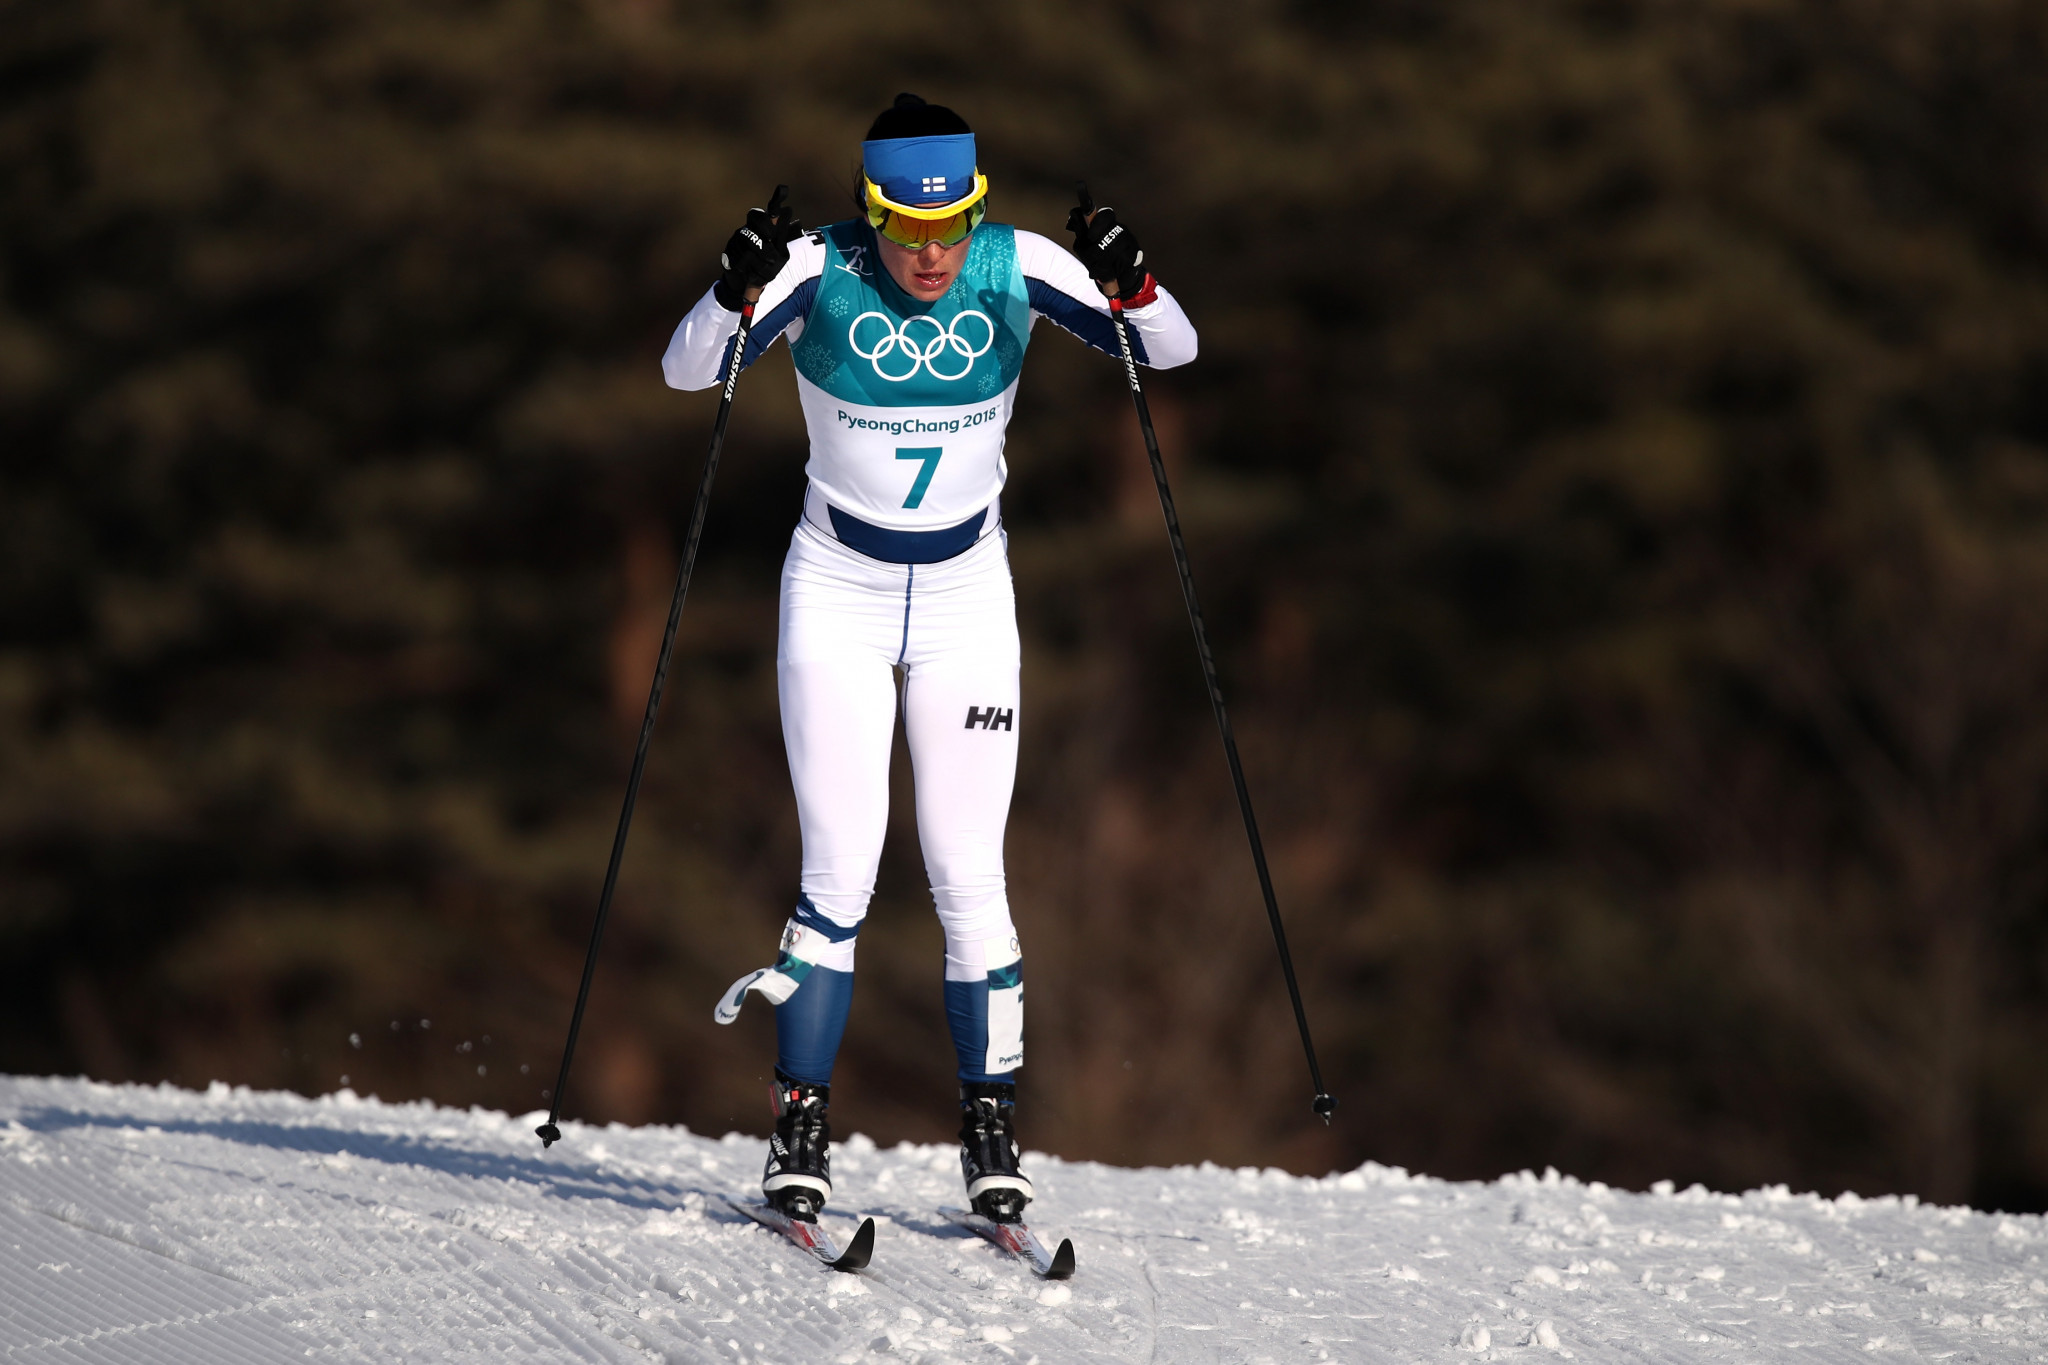 Finland's Krista Pärmäkoski returned to winning ways following the break for the Winter Olympic Games in Pyeongchang as she claimed victory in the women's 10 kilometres classic race ©Getty Images